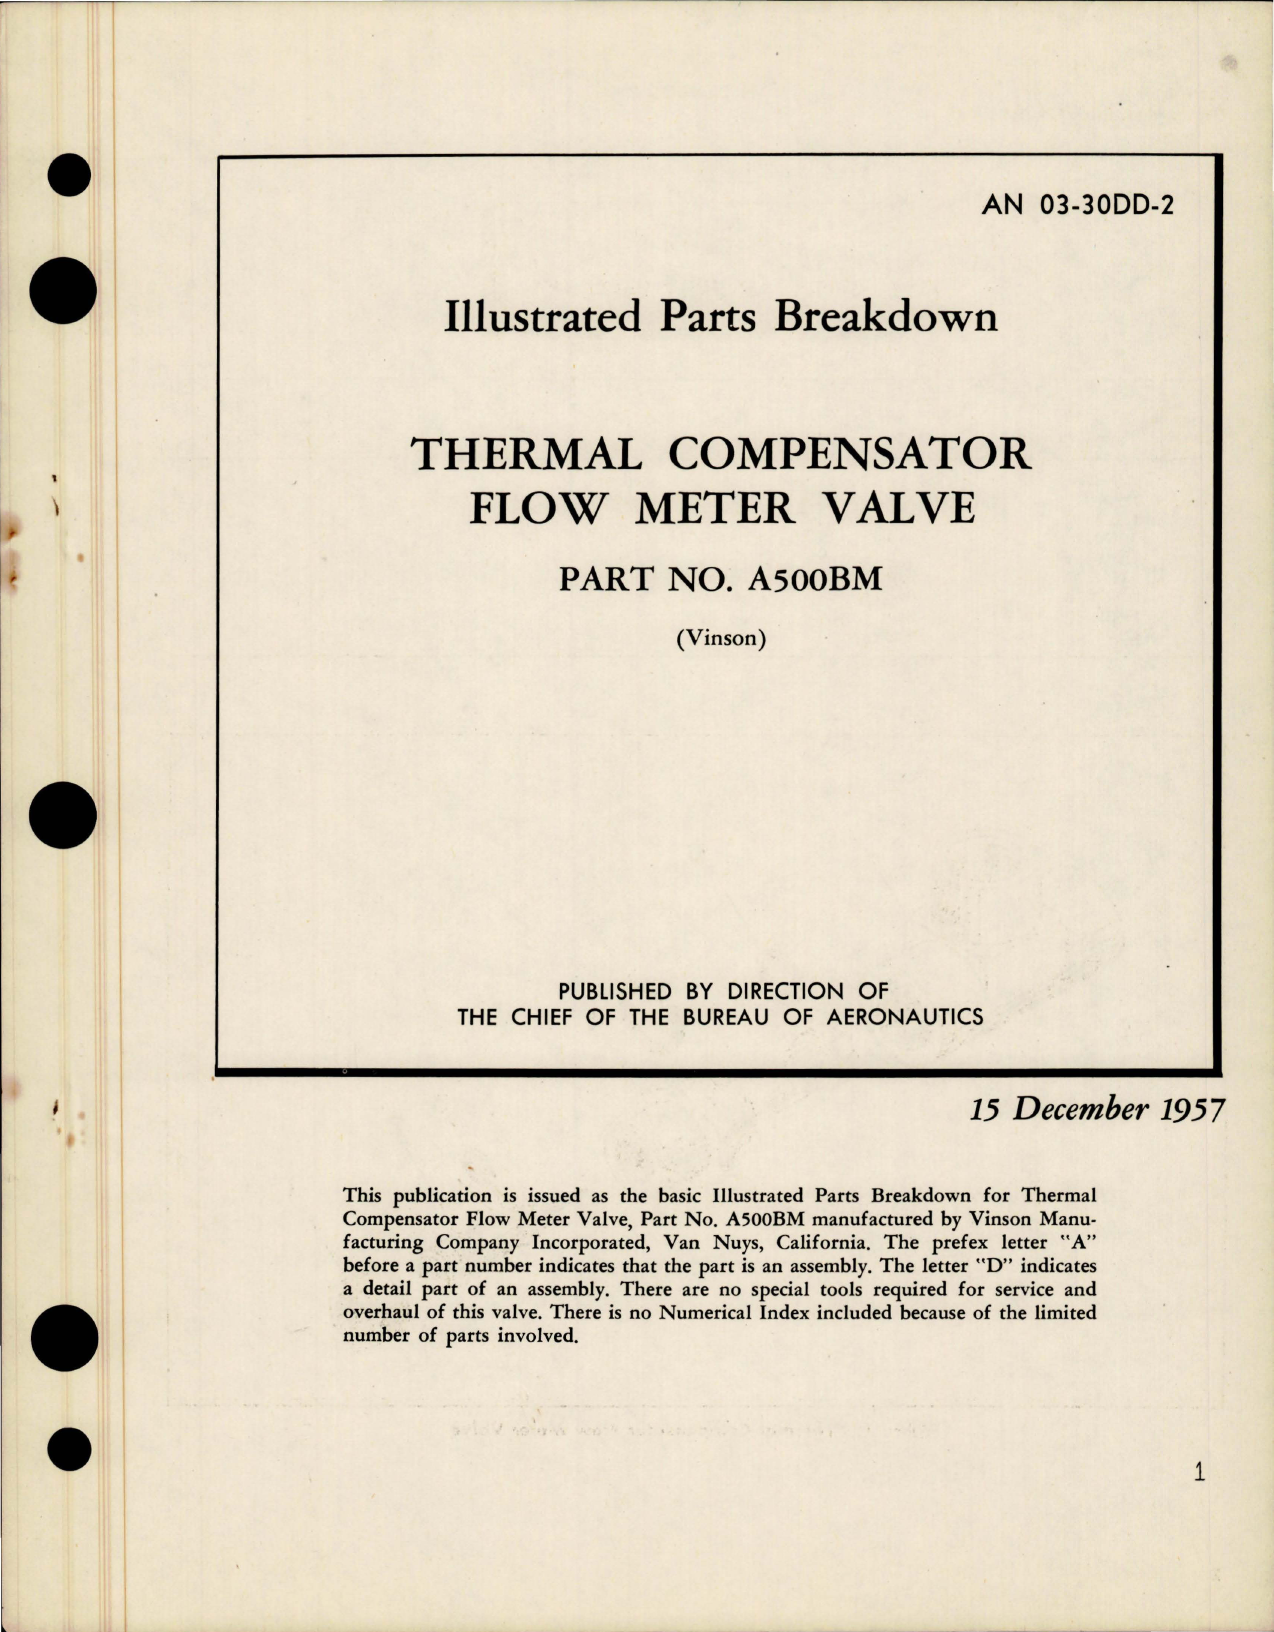 Sample page 1 from AirCorps Library document: Illustrated Parts Breakdown for Thermal Compensator Flow Meter Valve - Part A500BM